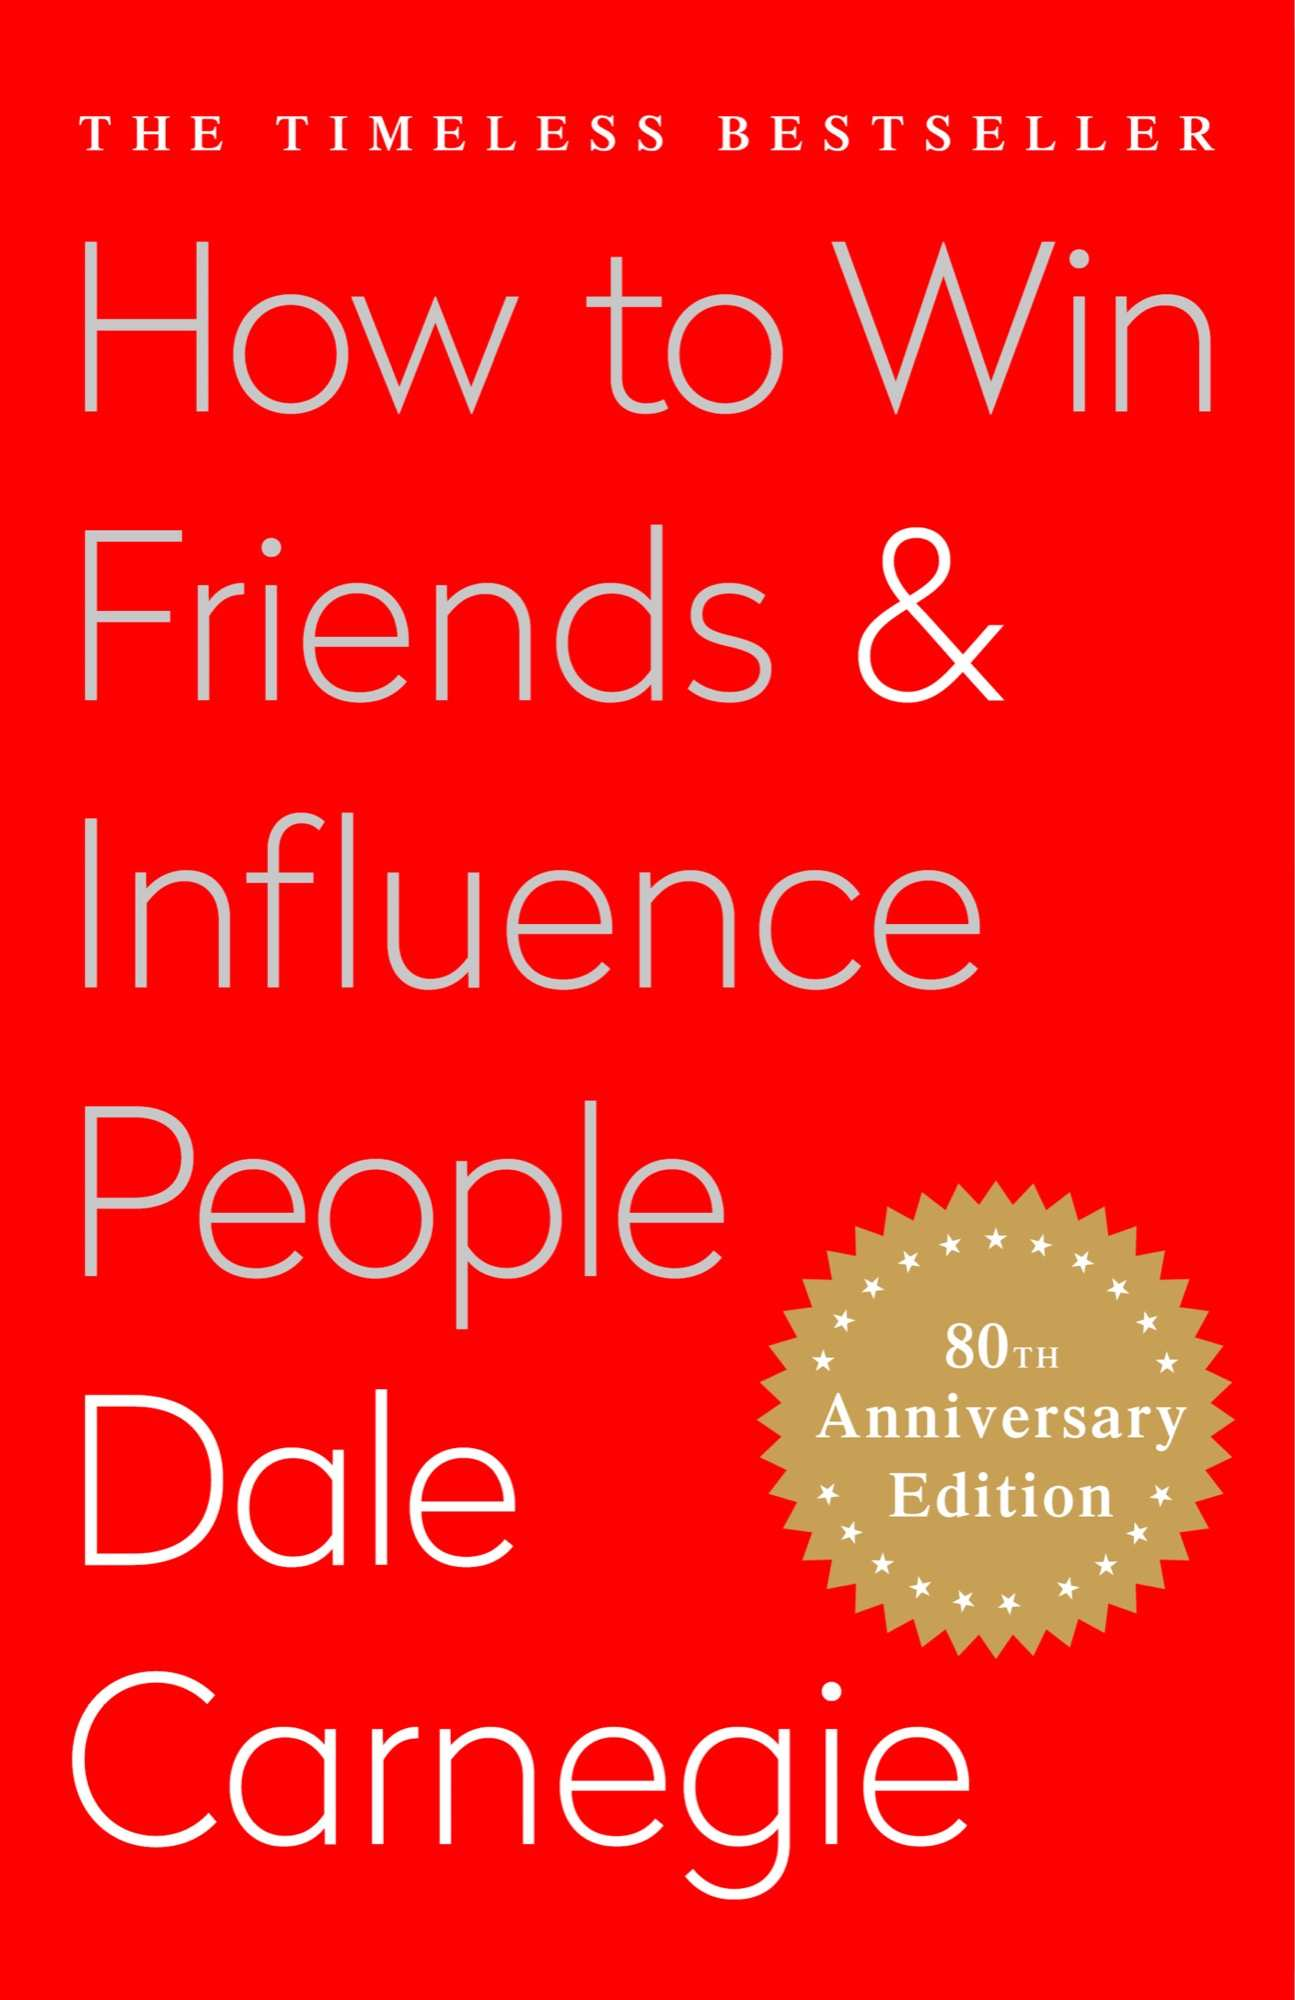 book summary - How to Win Friends and Influence People by Dale Carnegie